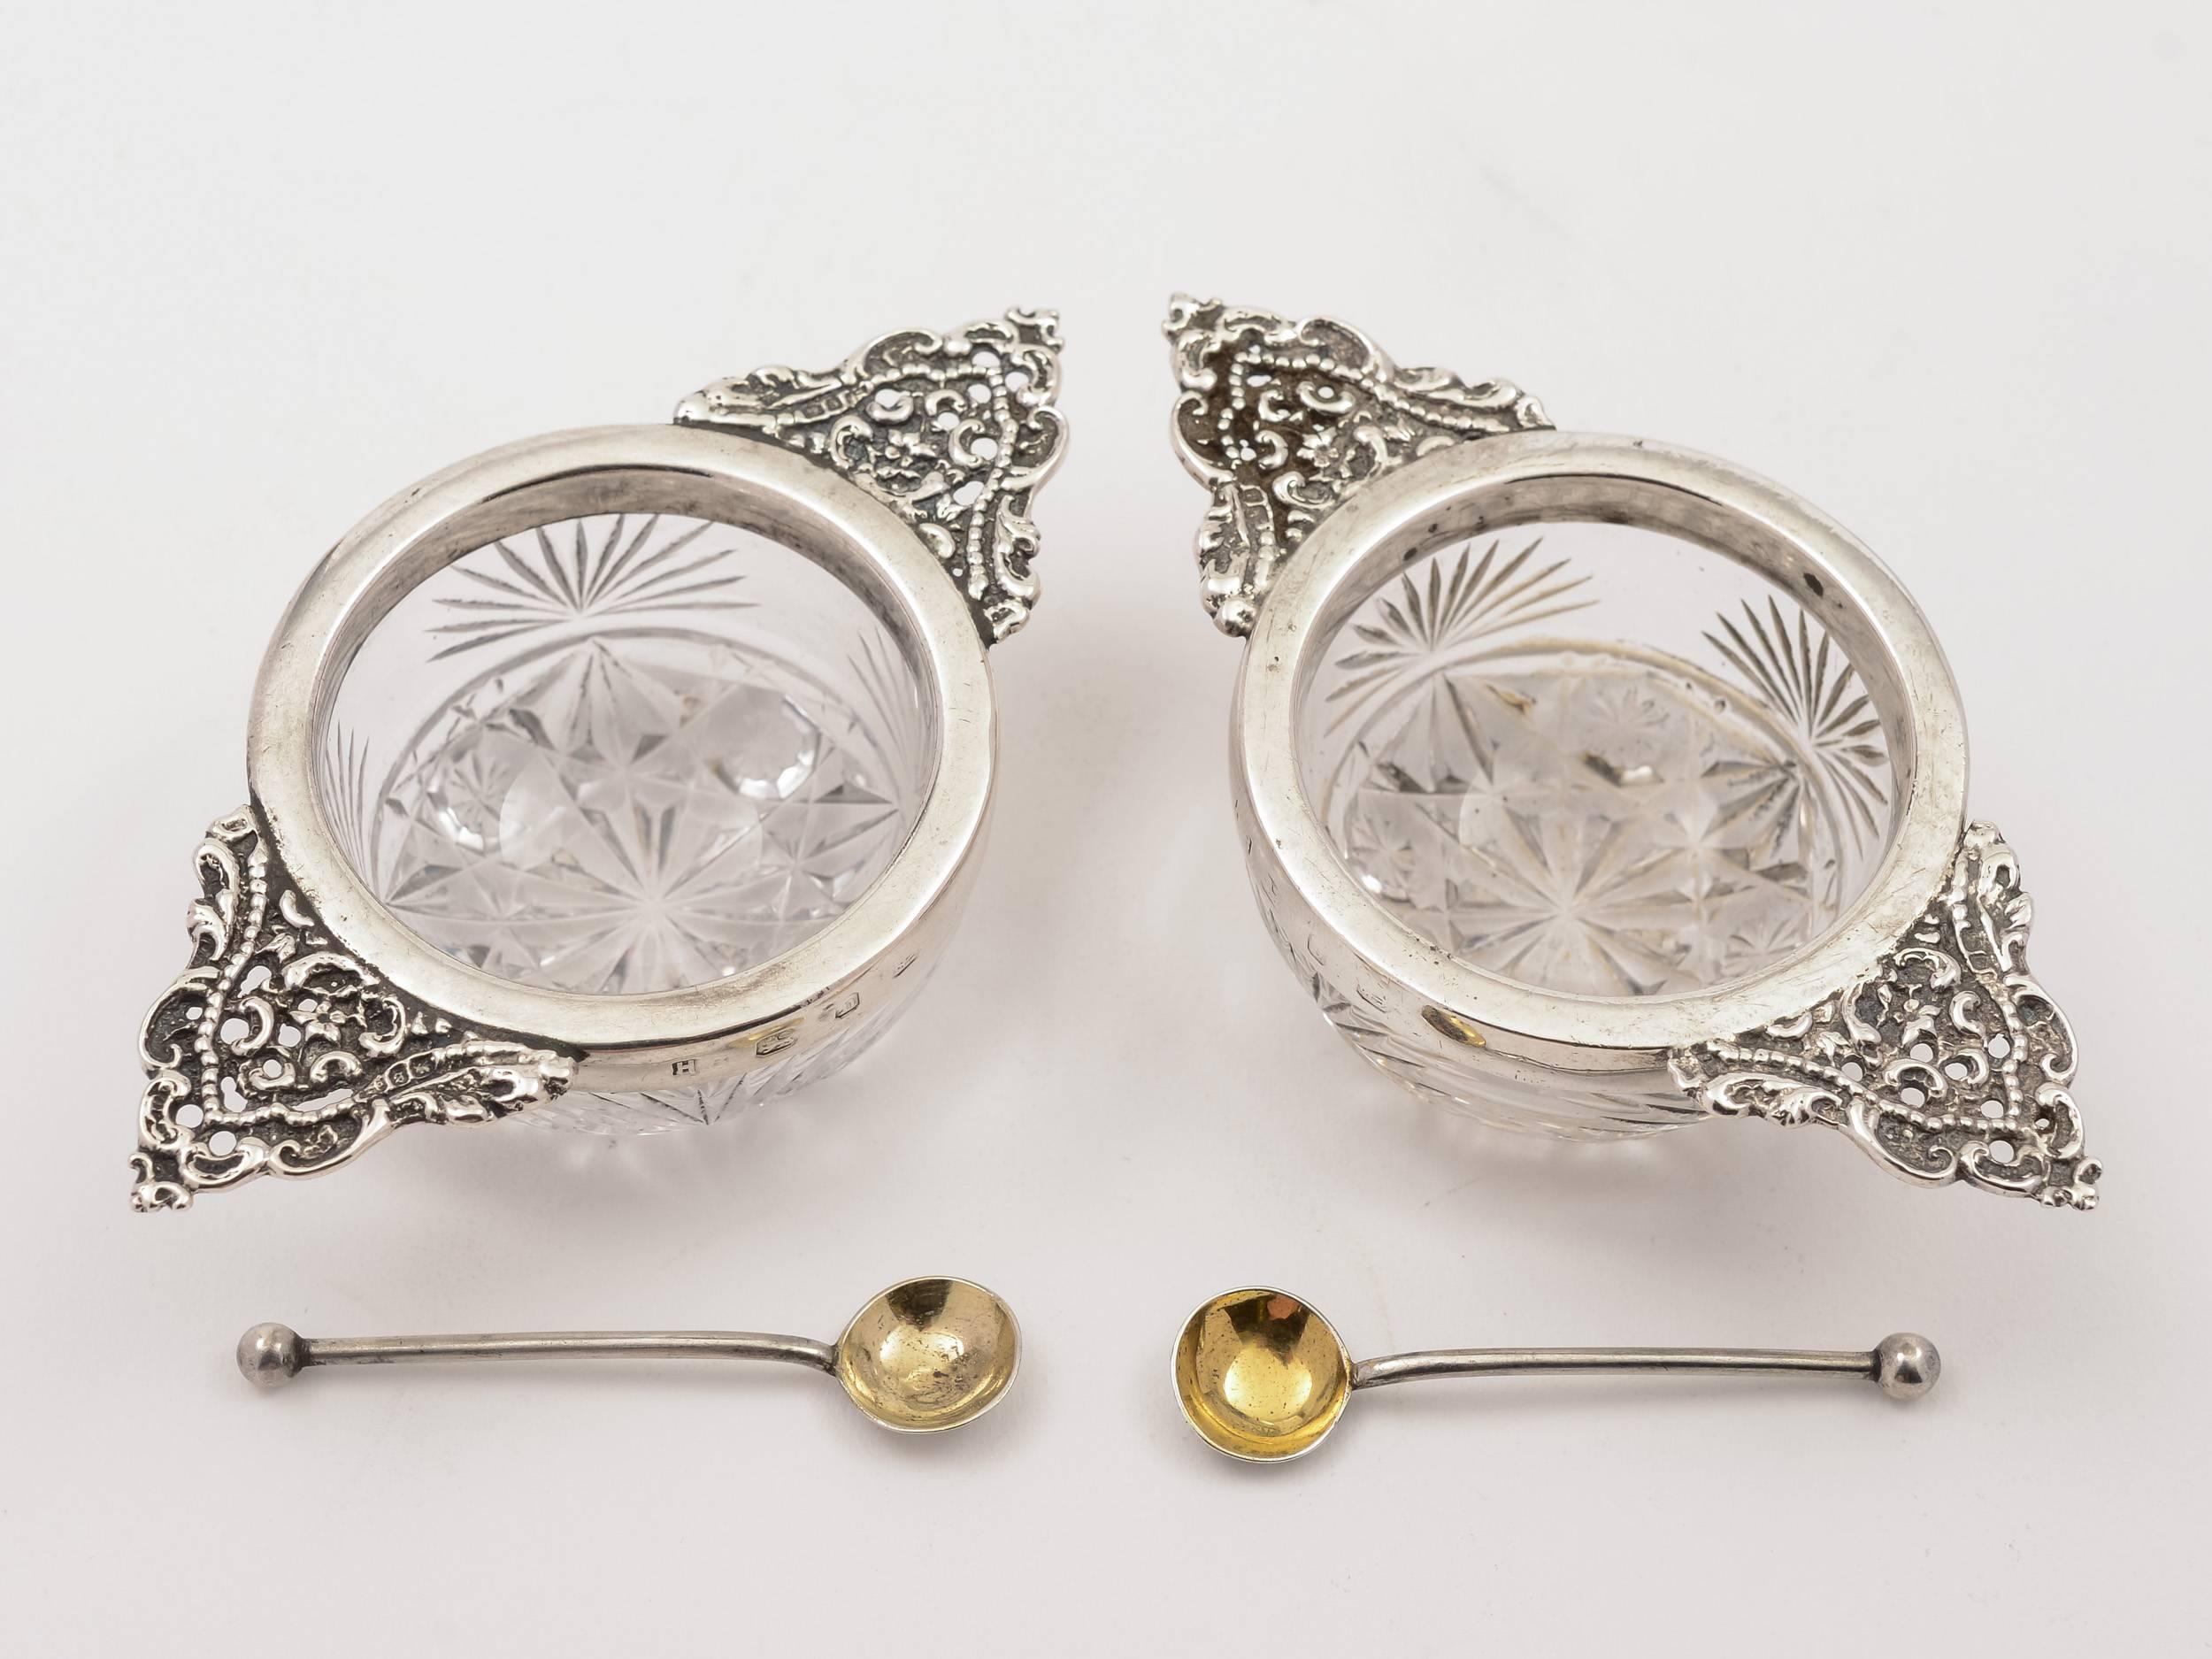 A pretty pair of English Victorian silver and intaglio cut-glass quaich shaped salts with silver salt spoons. Hallmarked Birmingham 1895 and marked H.B for the maker Henry Bourne, Ludgate Hill, Birmingham.

Measurements:
Height: 1